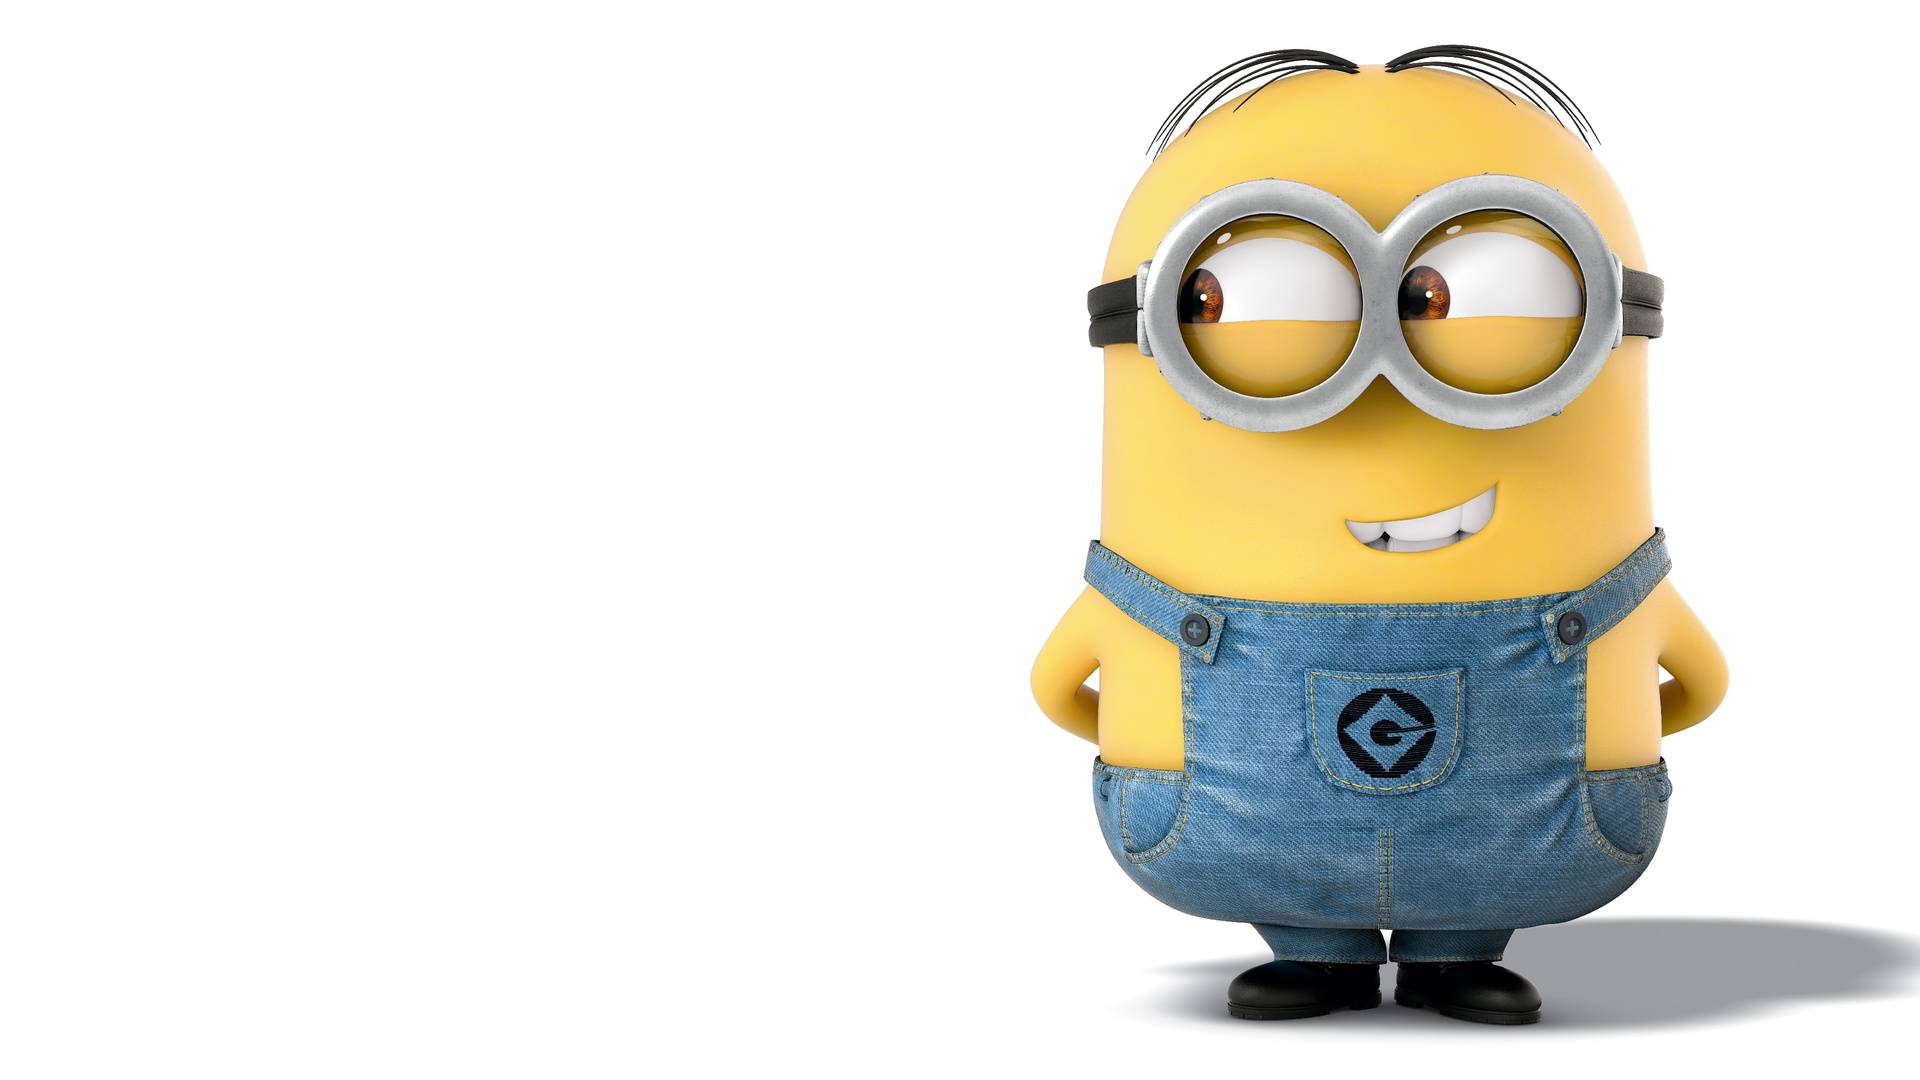 Despicable Me 2 Wallpapers